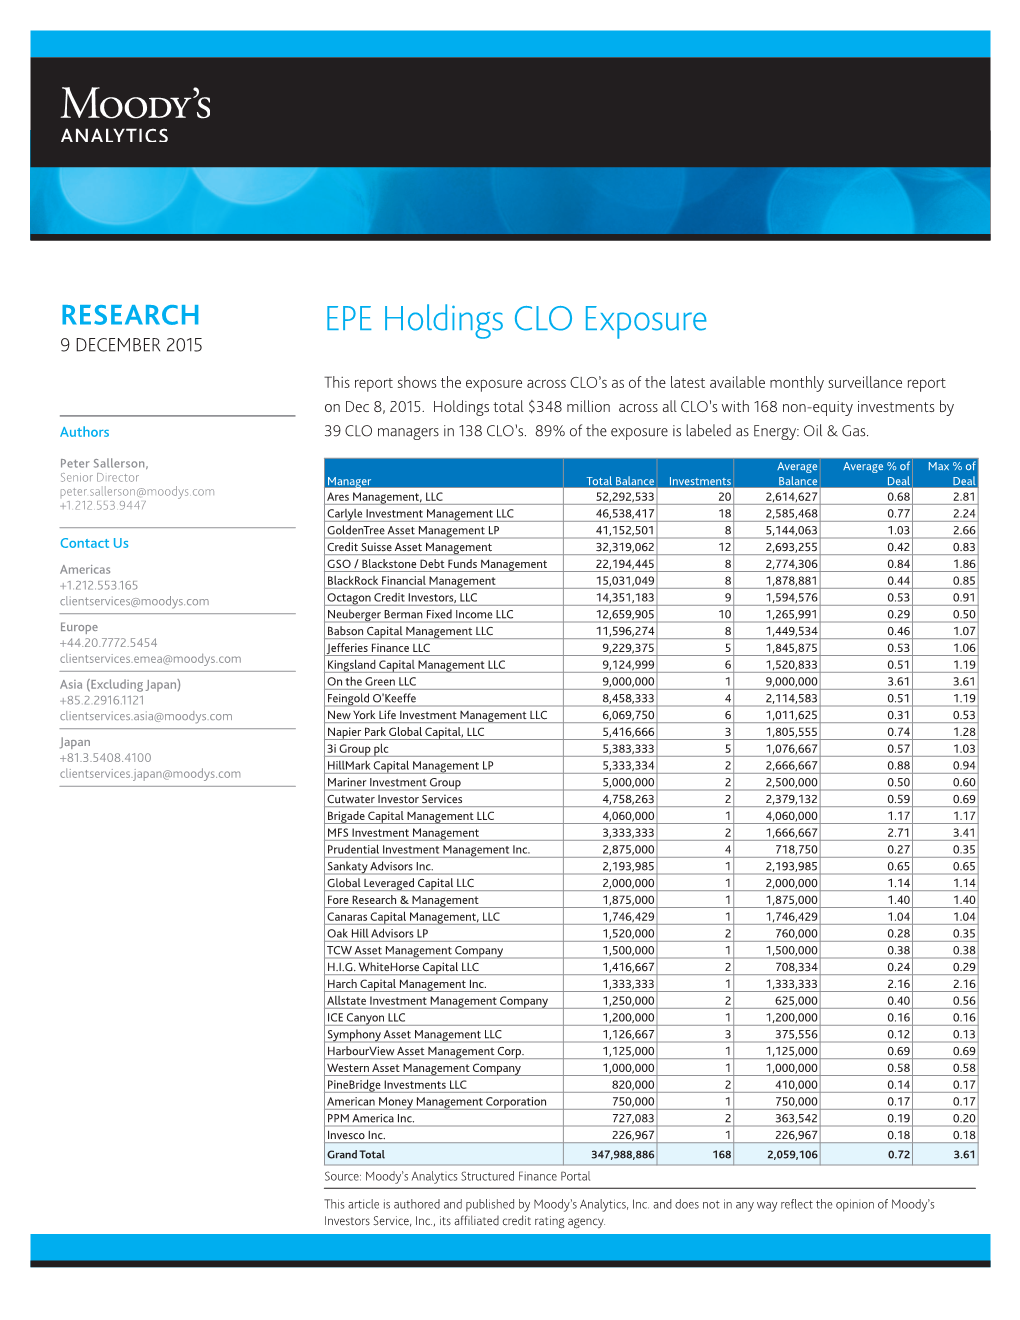 EPE Holdings CLO Exposure 9 DECEMBER 2015